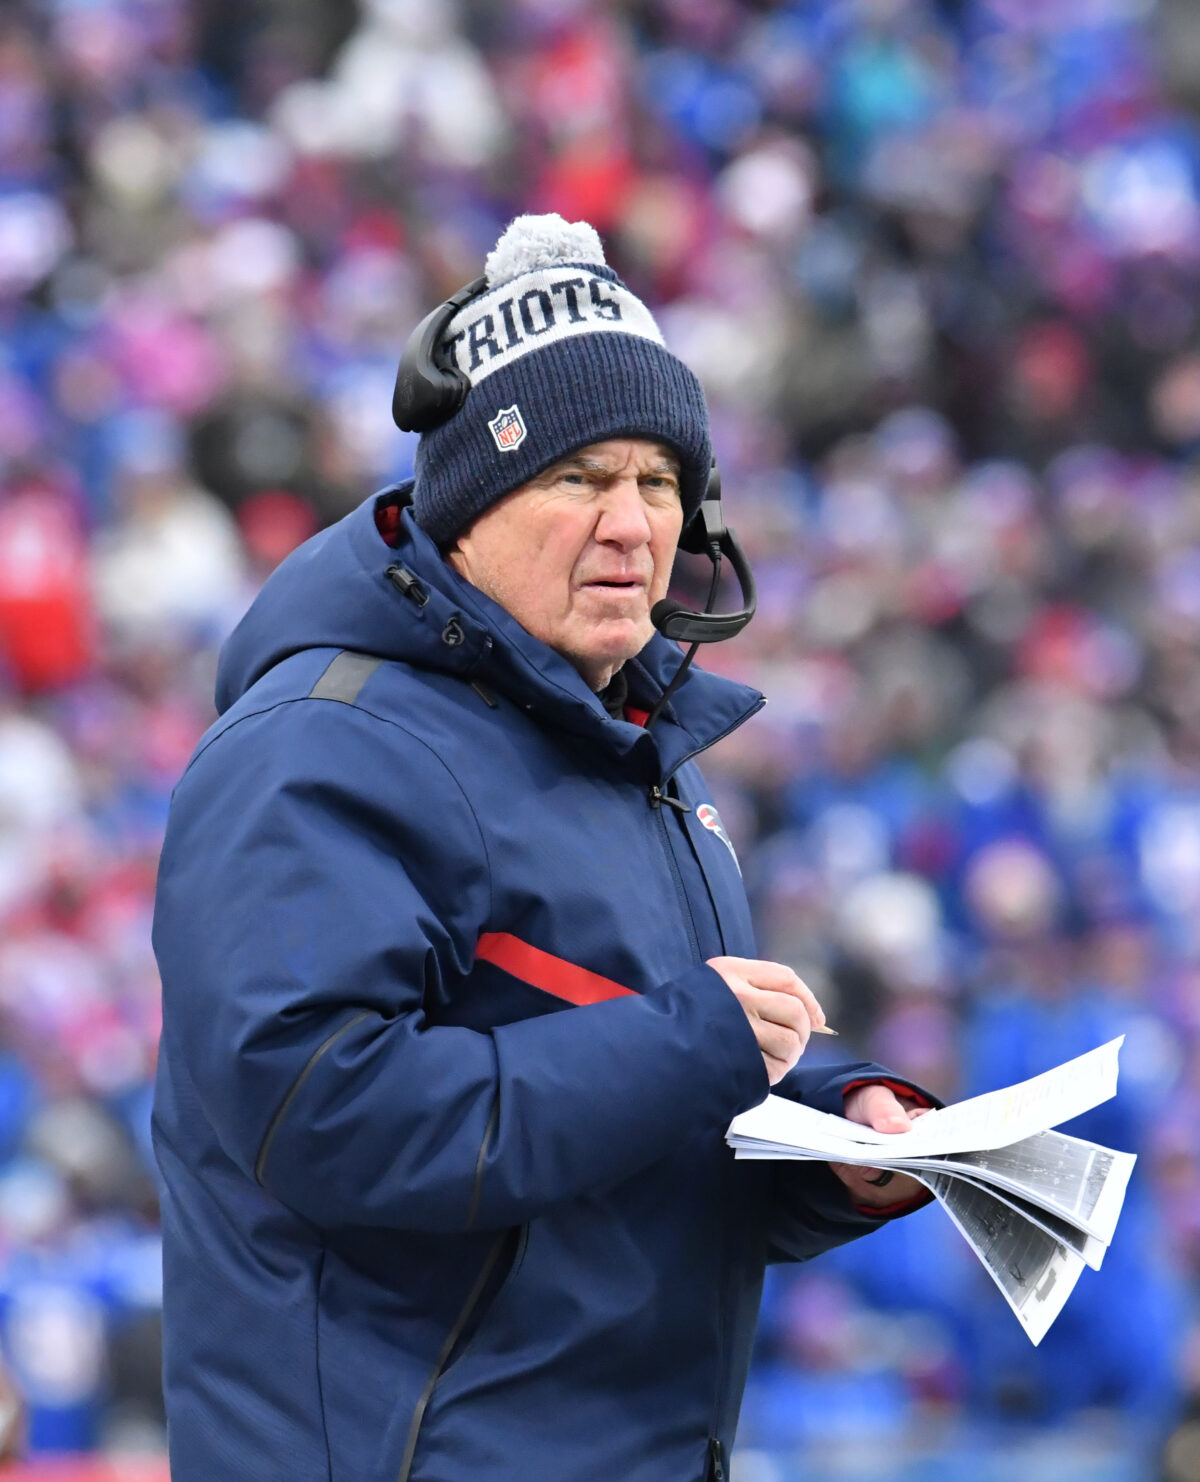 Patriots skilled positions sit among the NFL’s worst in ESPN ranking